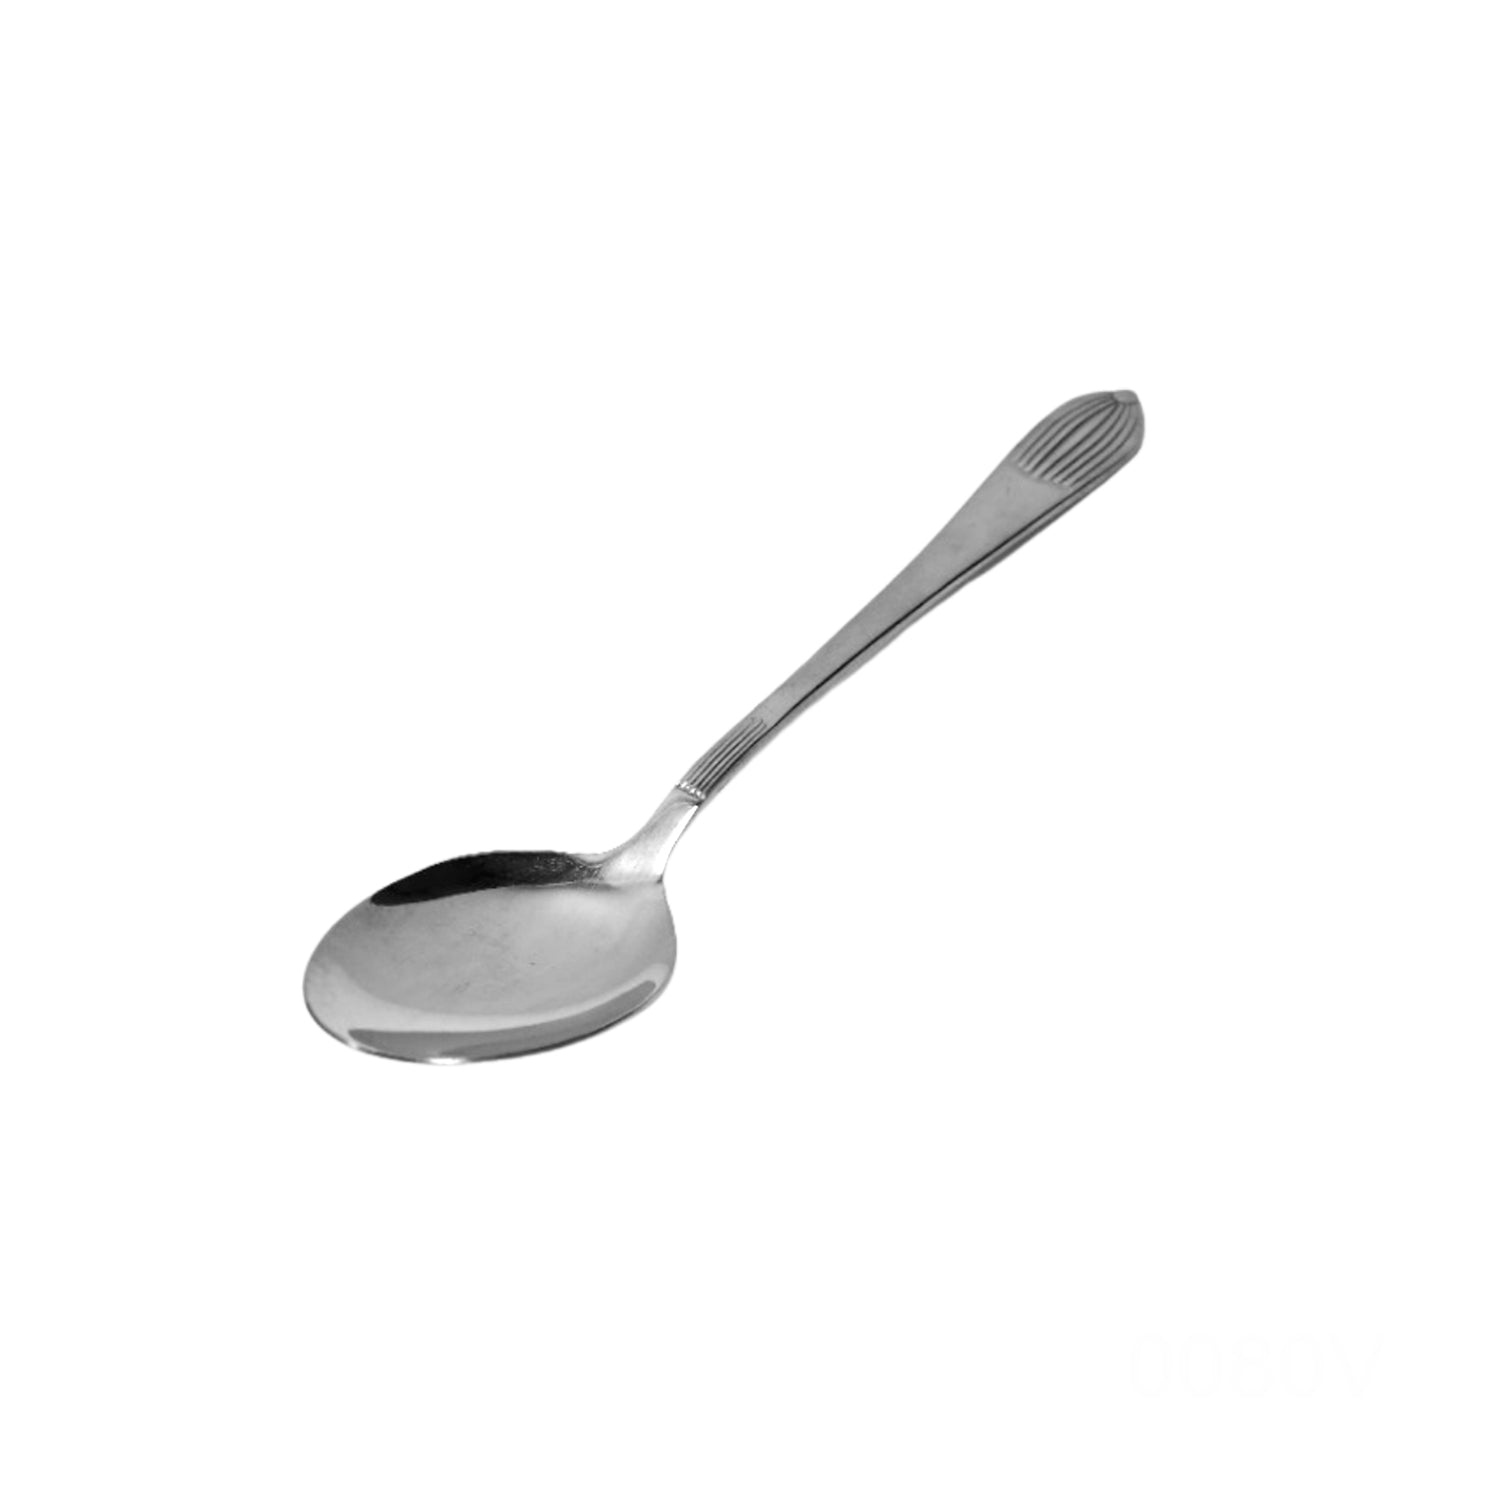 2435 Stainless Steel Spoon 1pc Spoon. Spoon for Coffee, Tea, Sugar, & Spices. DeoDap